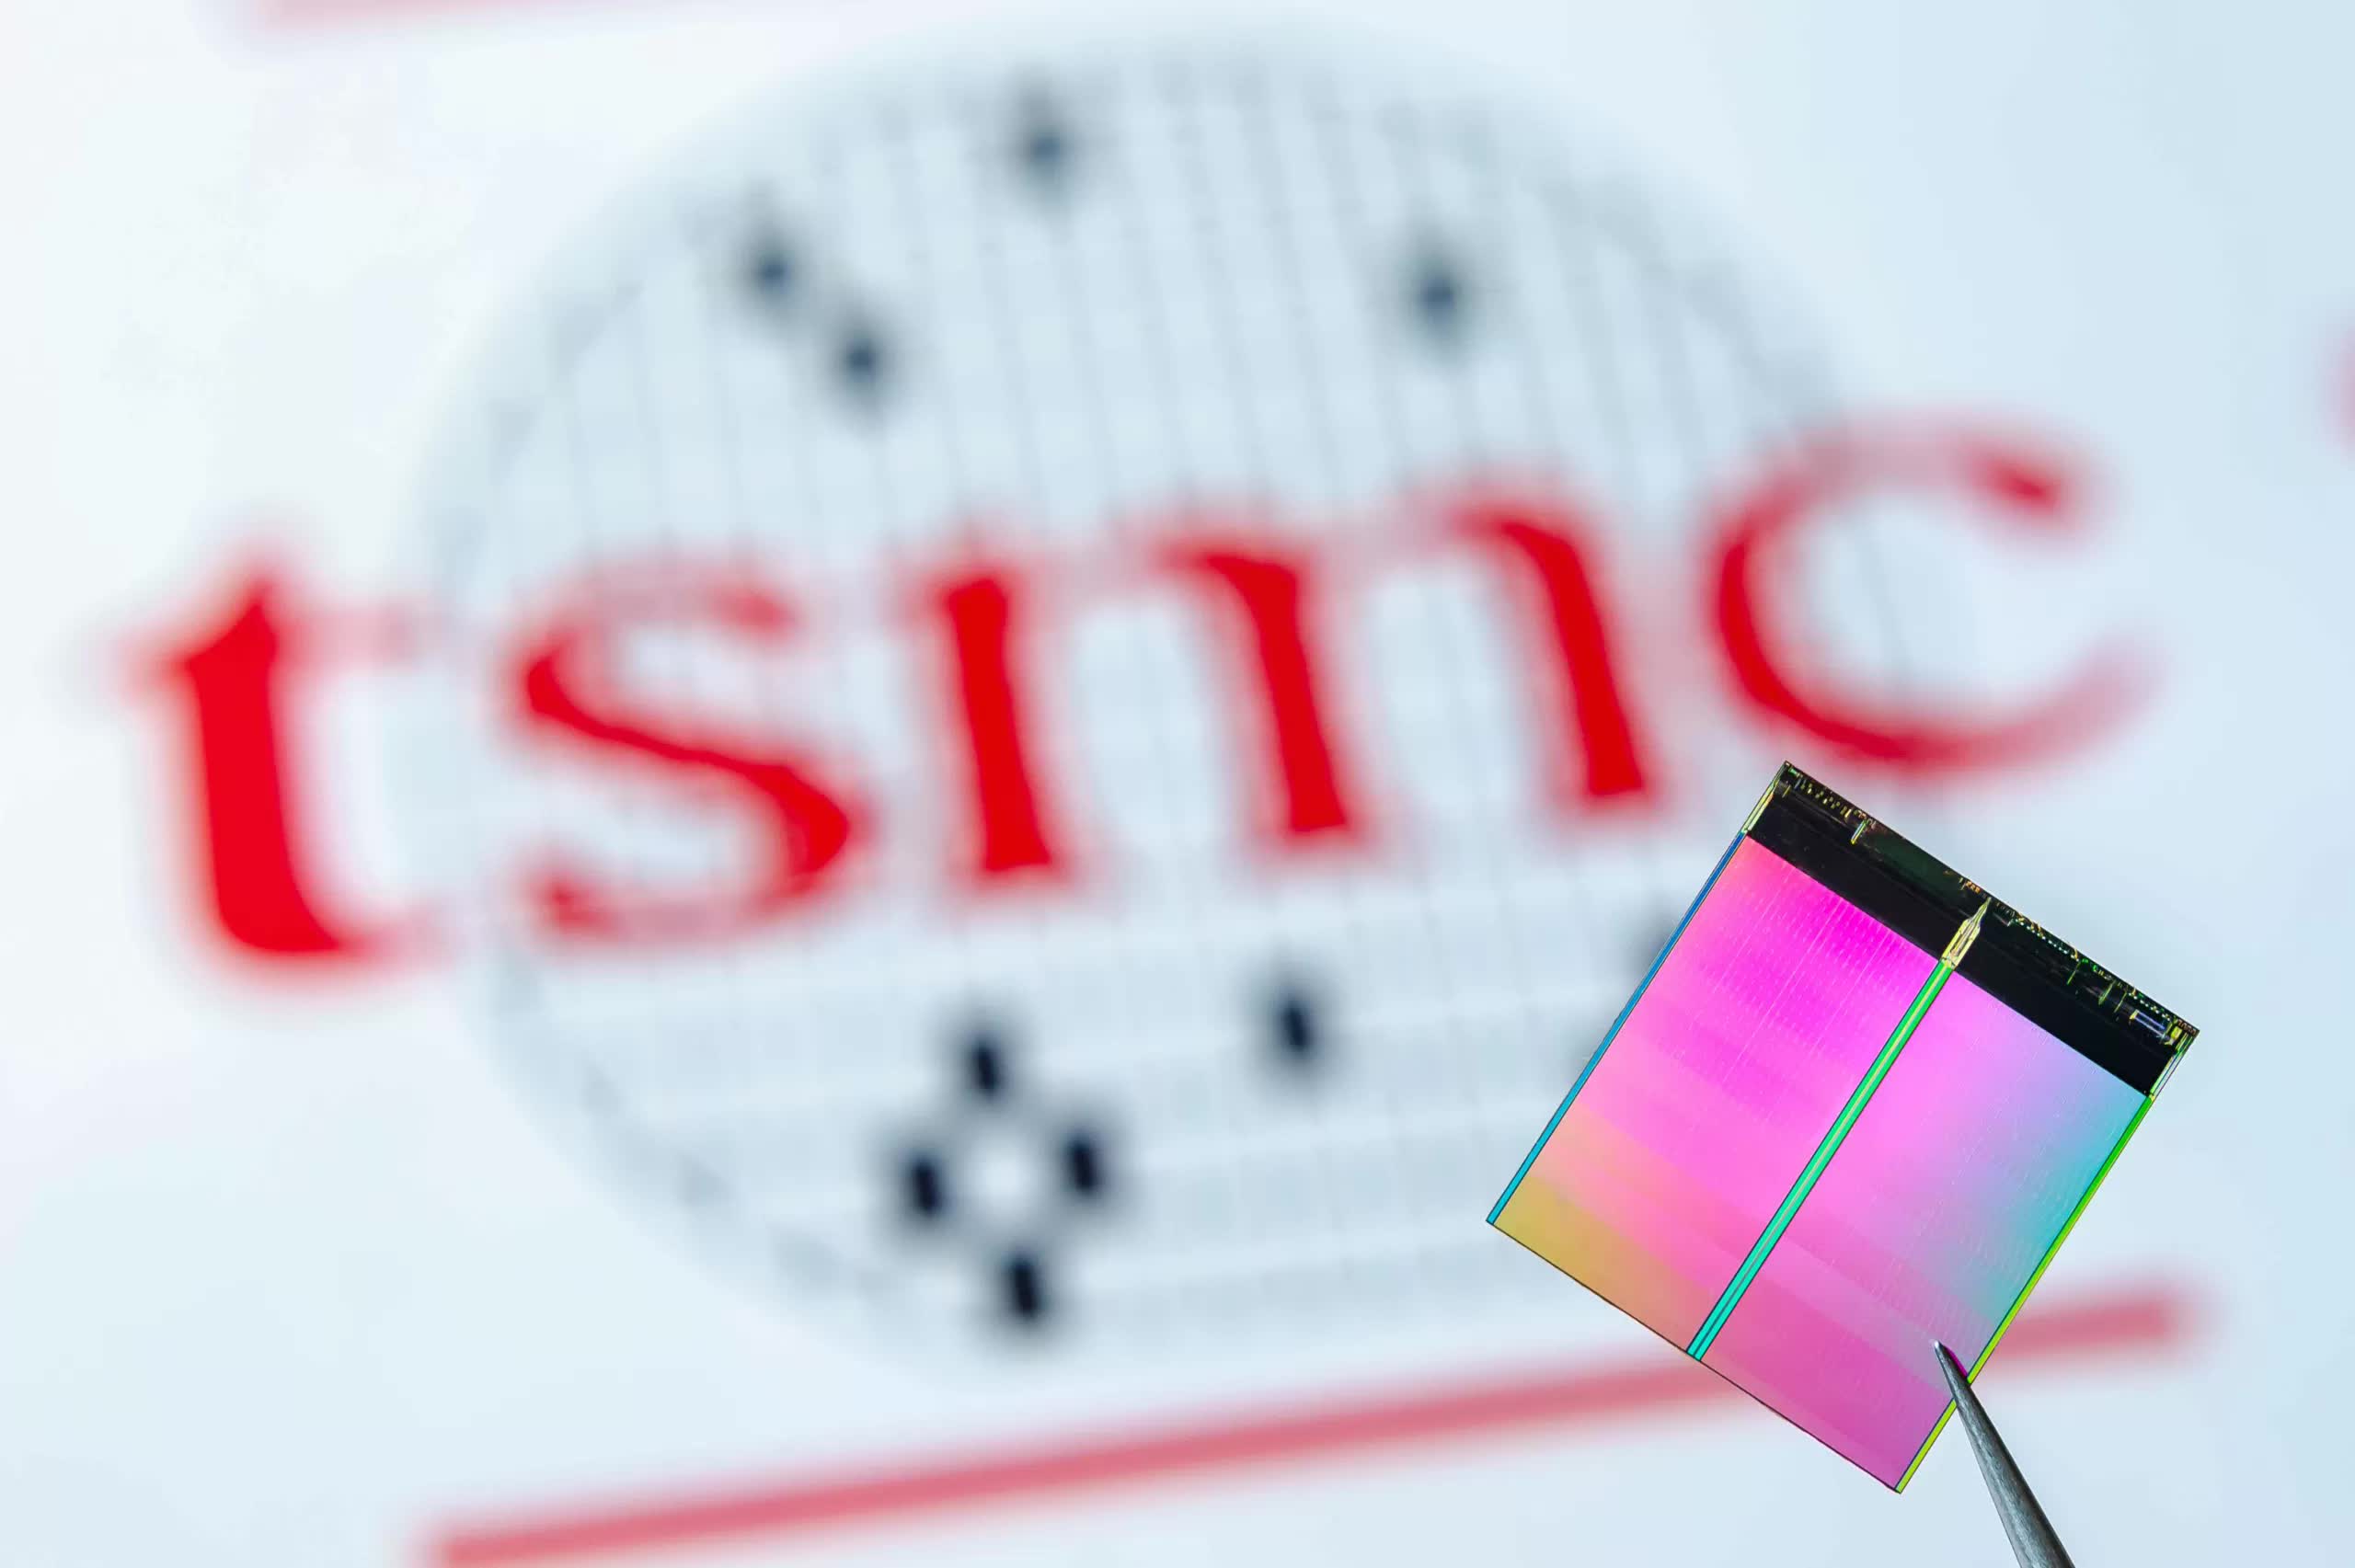 TSMC won't disclose customer data to the US government